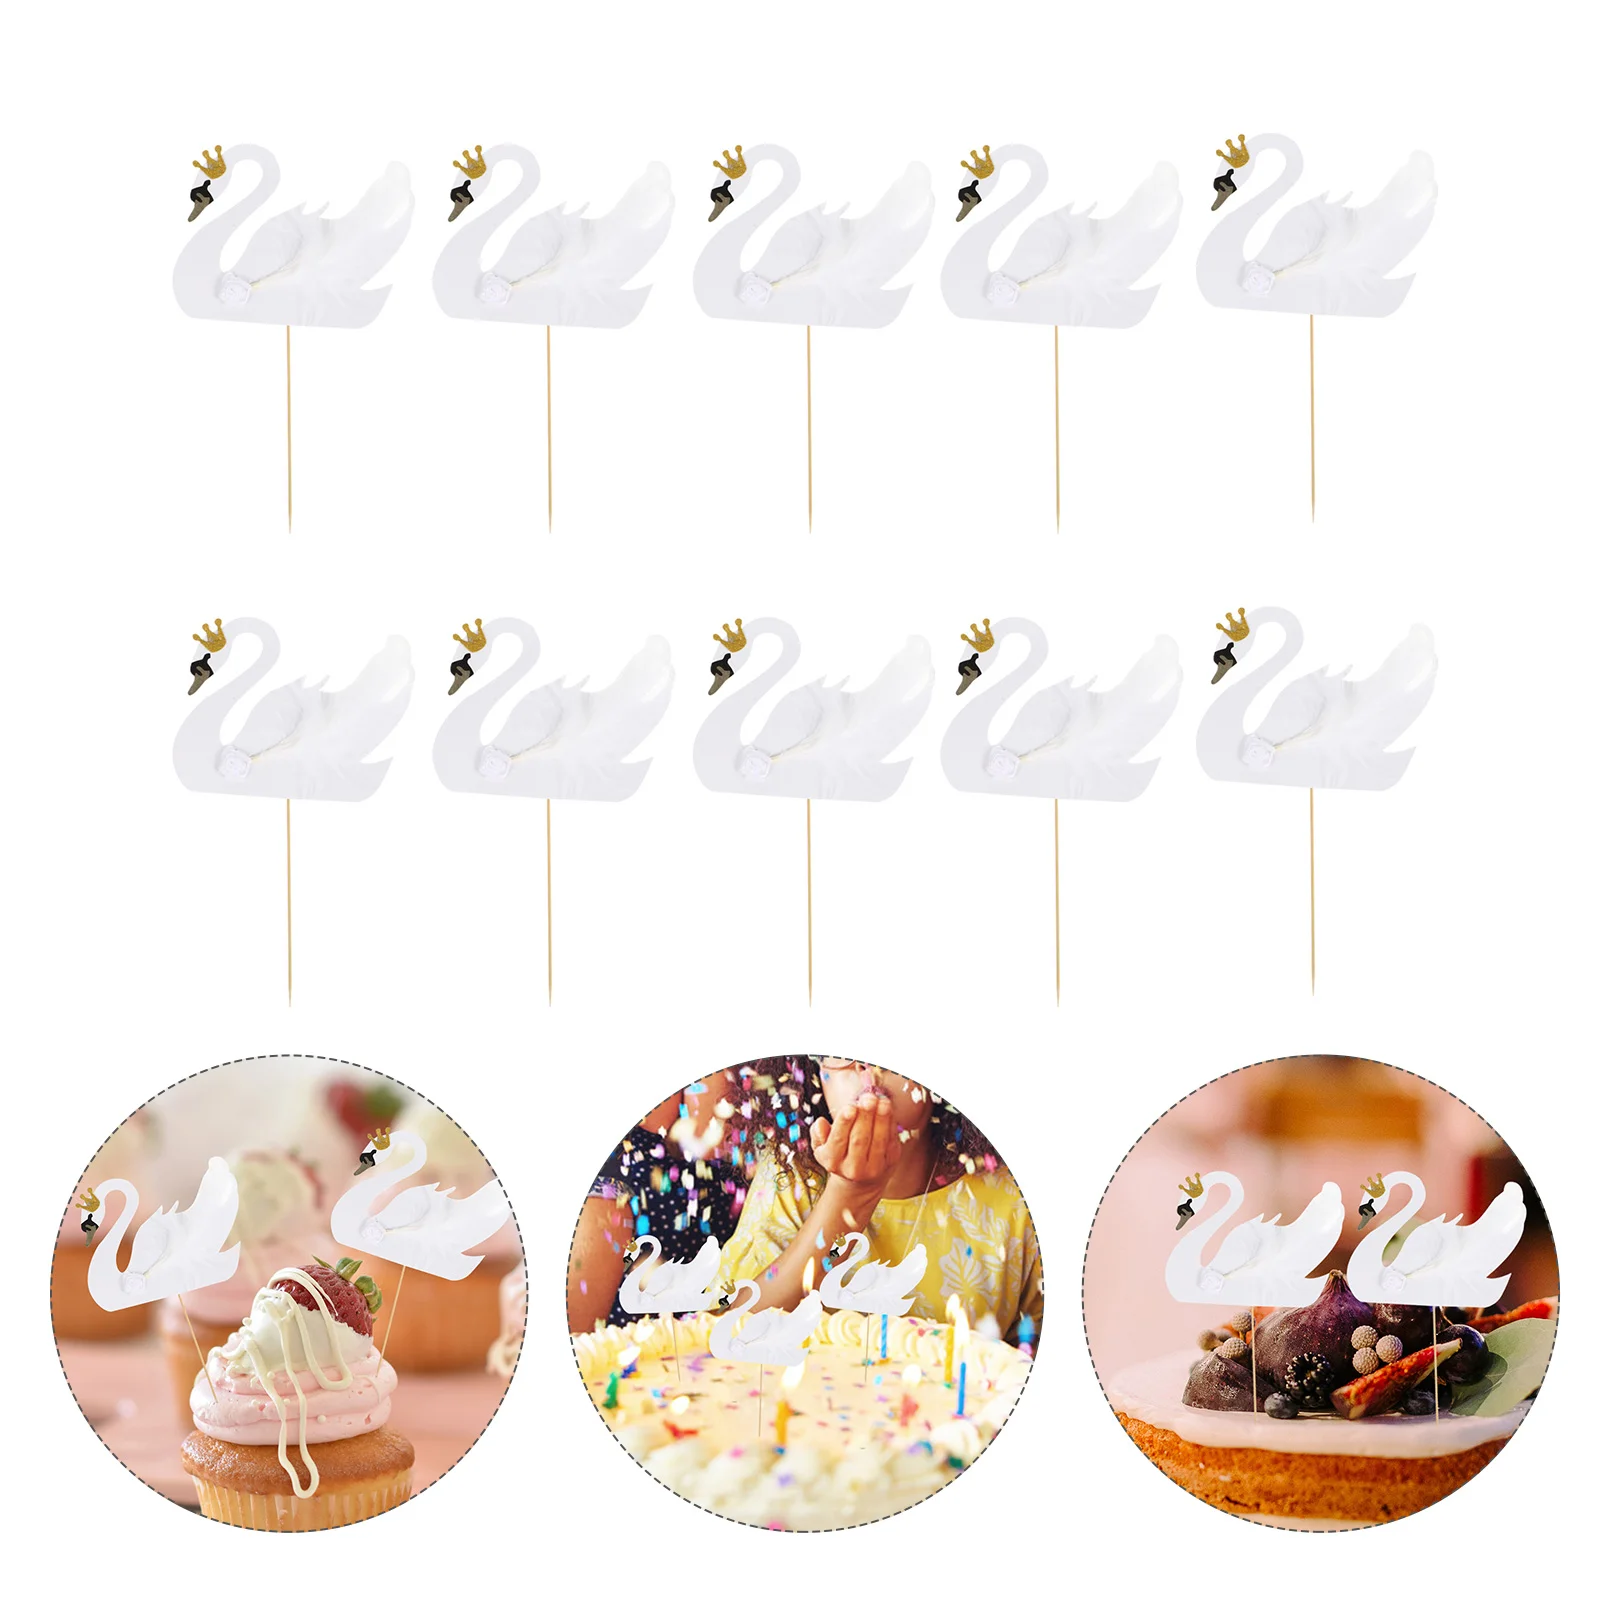 

Topper Swan Cake Picks Birthday Cupcake Dessert Toothpicks Party Food Fruits Appetizers Toppers Wedding Animal Figurine